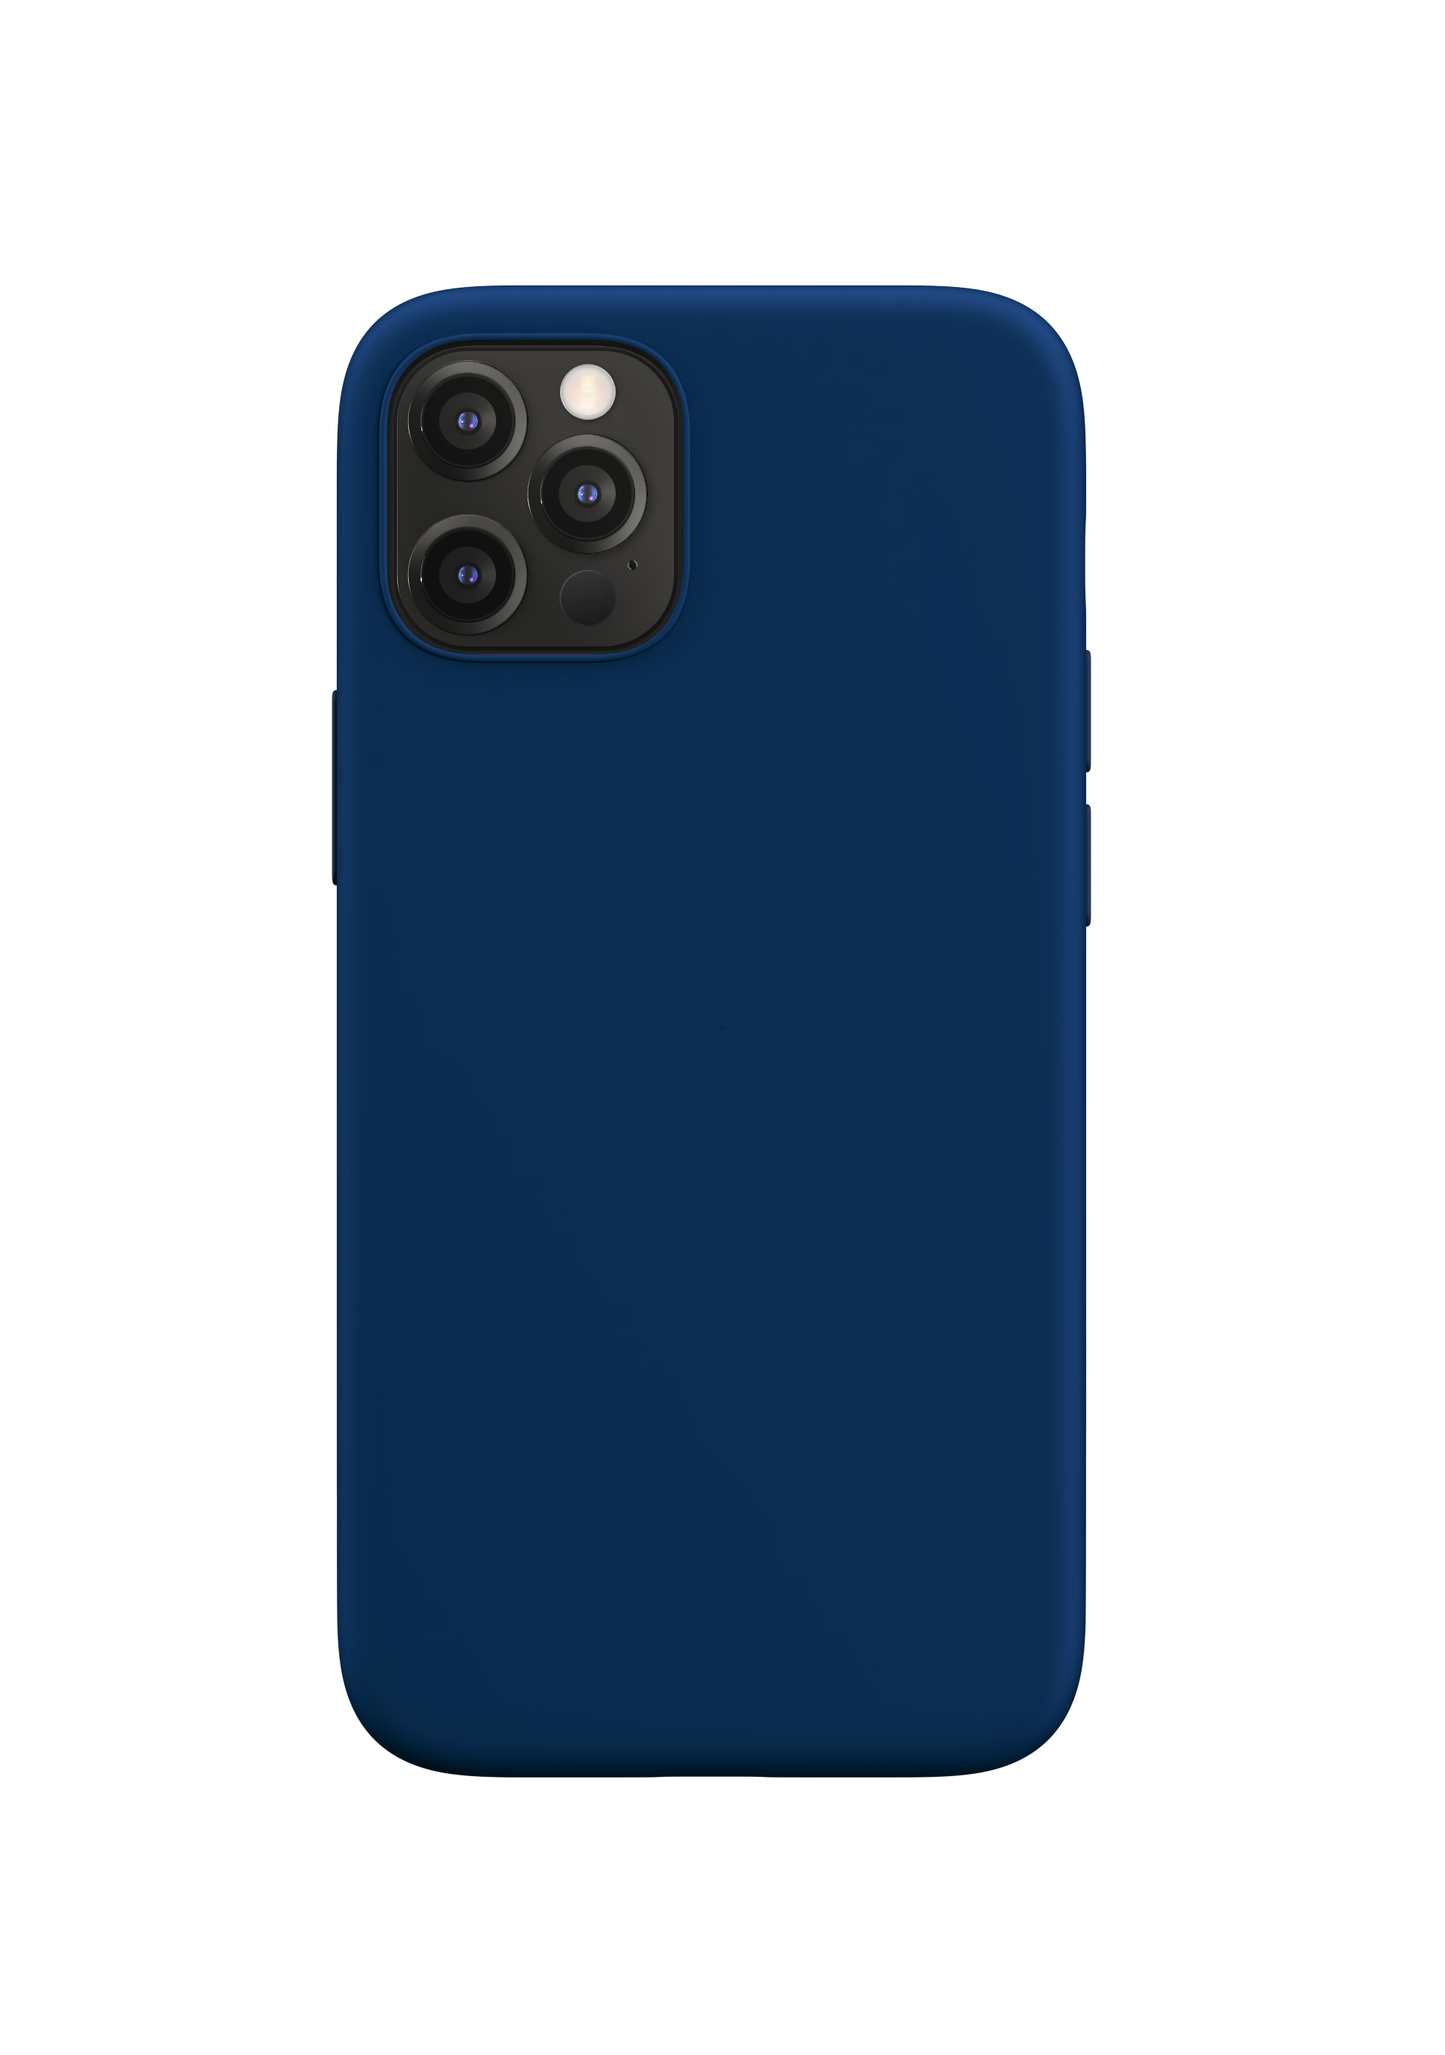 NEXT.ONE Silicone case MagSafe blue for iPhone 12 Pro Max